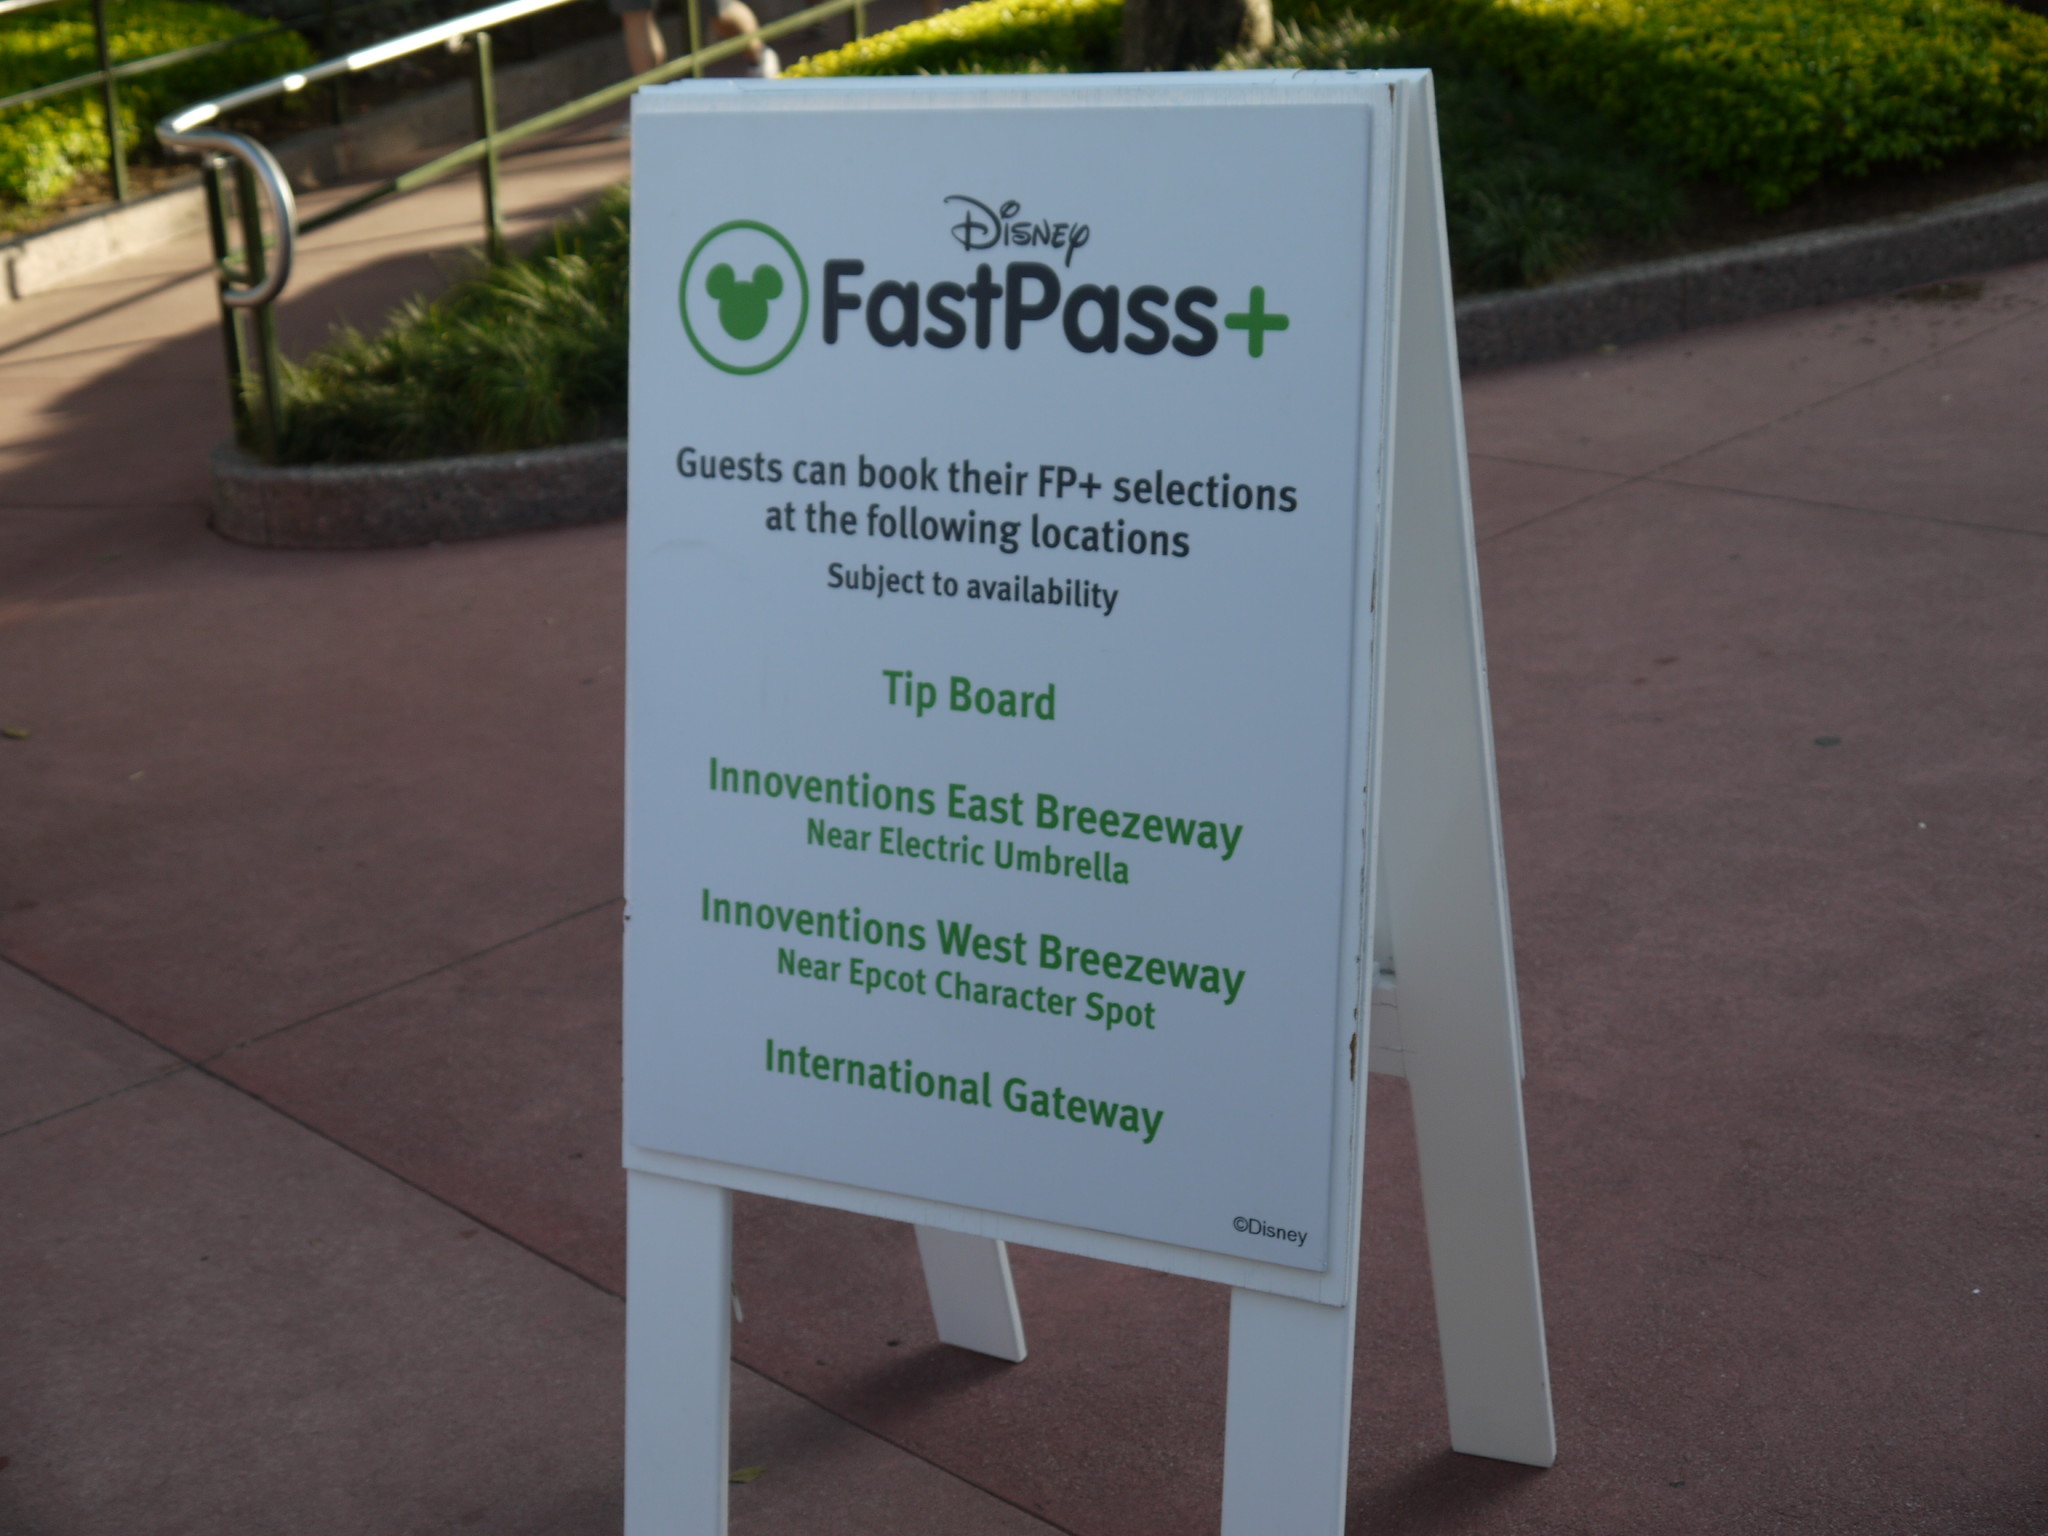 Top 3 FastPass+ Selections by Park at Walt Disney World